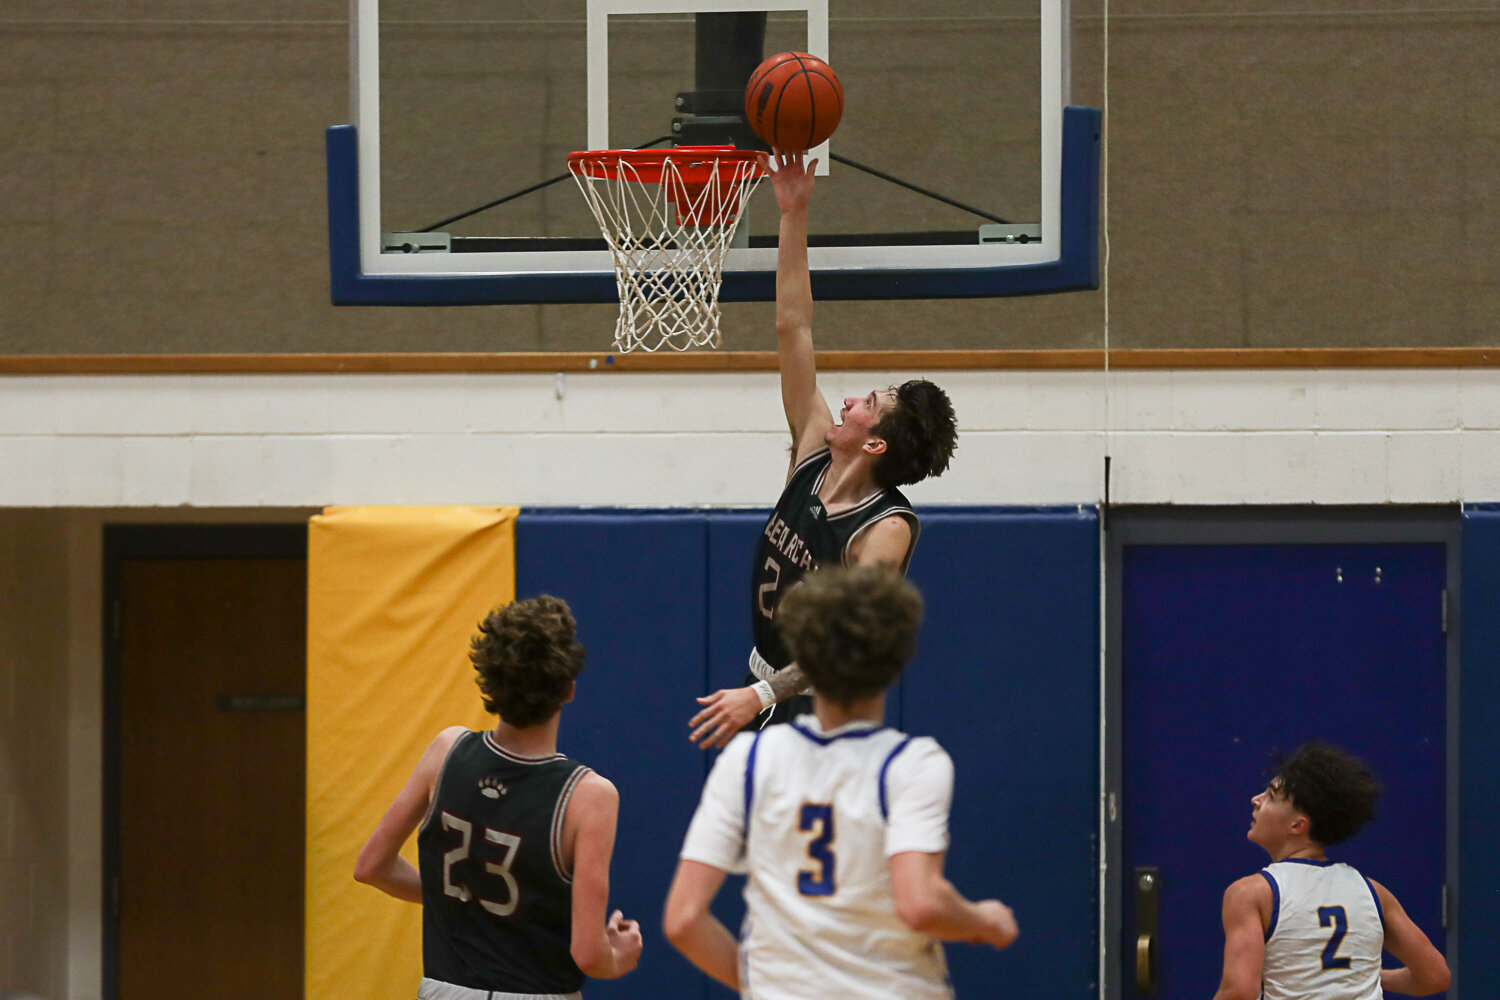 Tyler Klatush lays one in during a fastbreak during W.F. West's win at Rochester on Dec. 5.